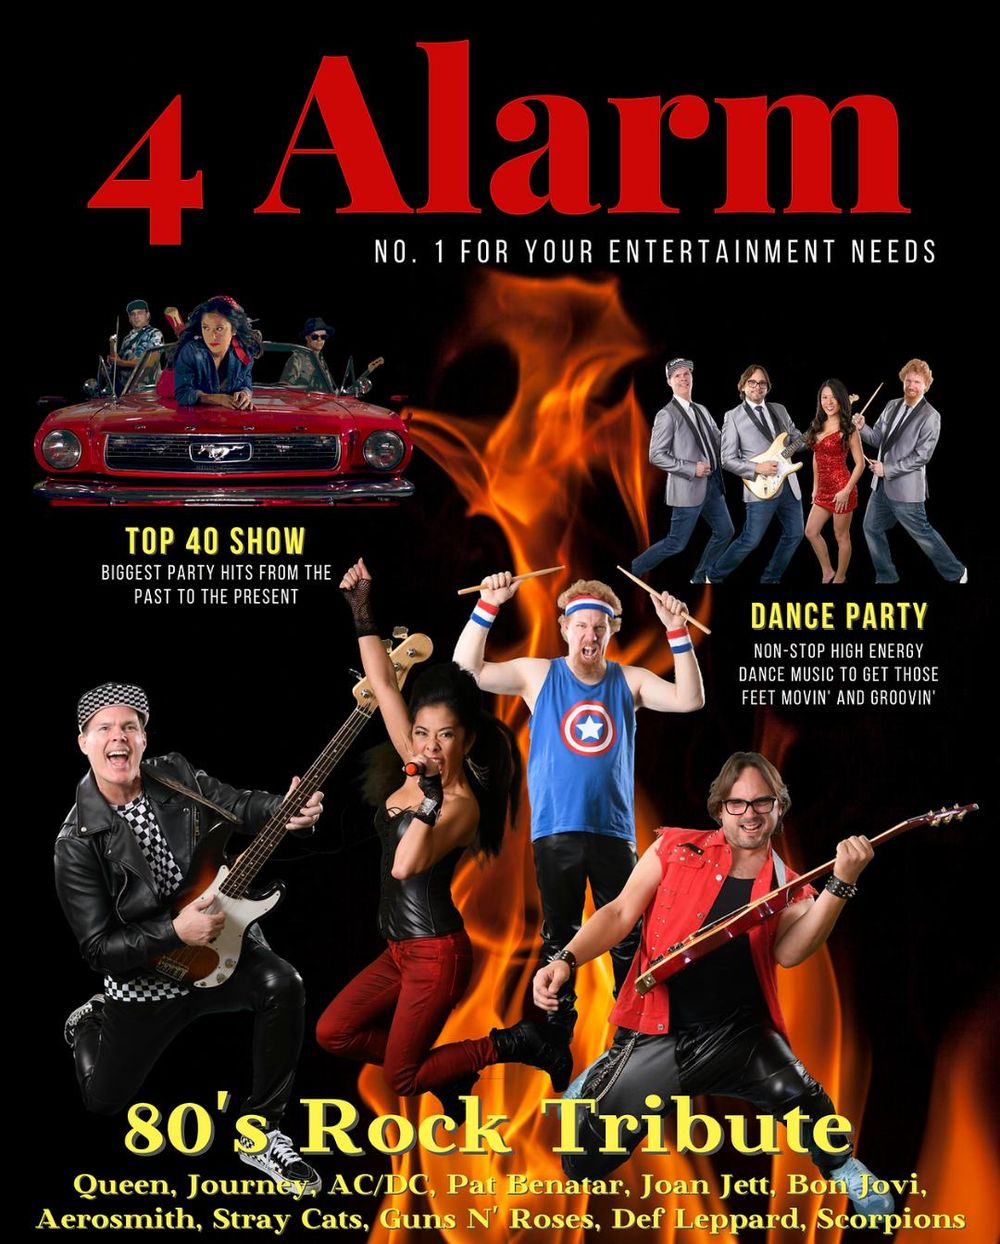 4 Alarm is Southern California's premier Top 40 Pop-Dance Current Hits cover band. With lead vocalist Viennie V on stage, you can get closer than you ever thought possible to a legit top 40 pop artist. 